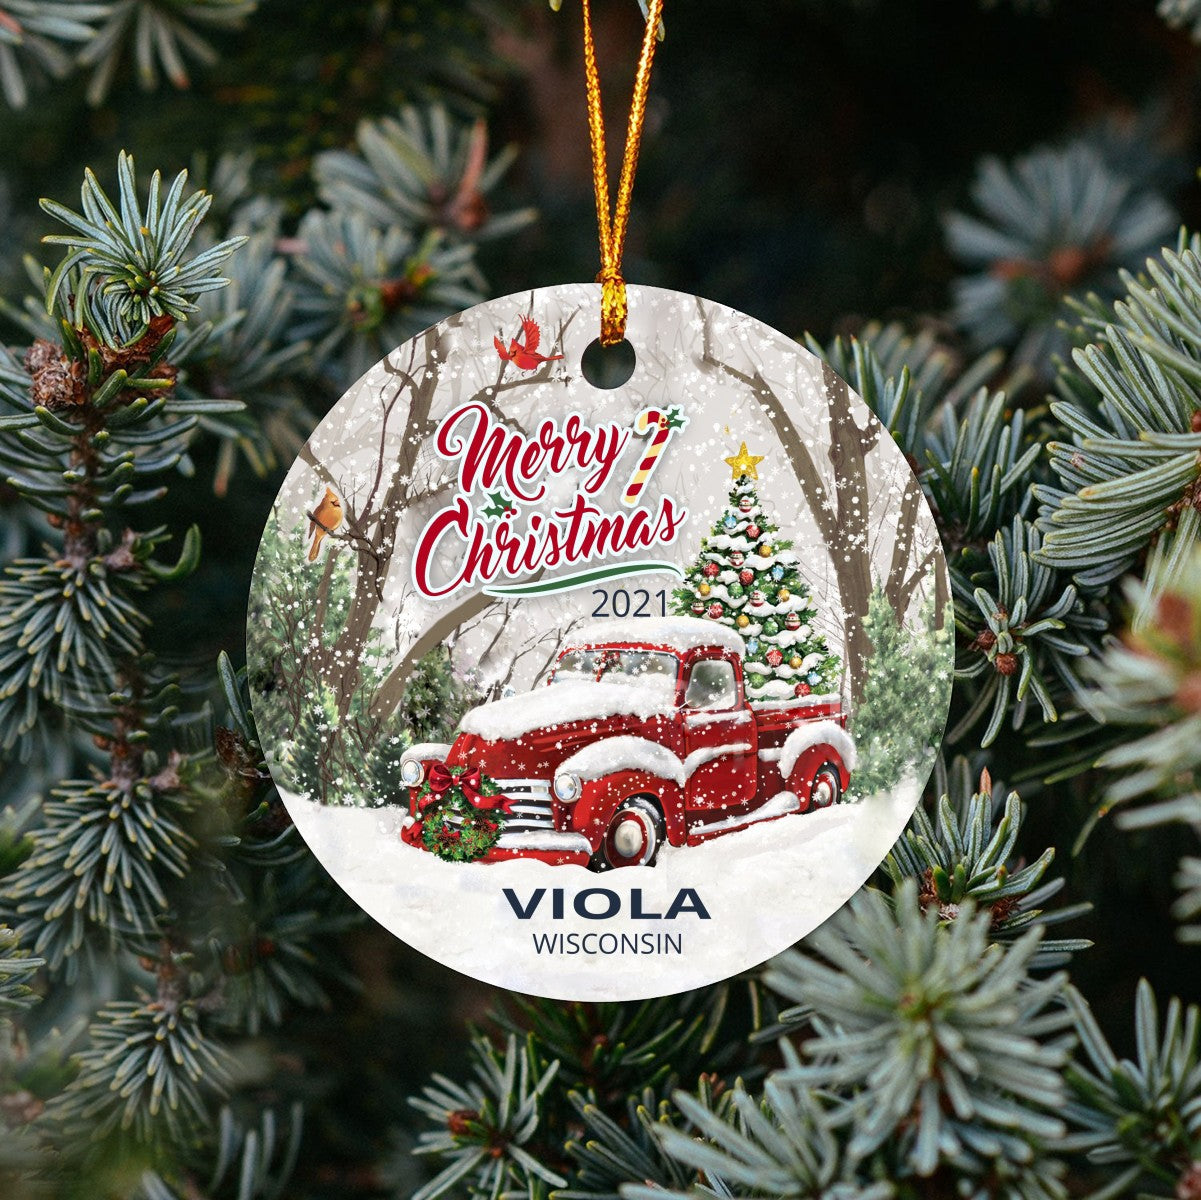 Christmas Tree Ornaments Viola - Ornament With Name City, State Viola Wisconsin WI Ornament - Red Truck Xmas Ornaments 3'' Plastic Gift For Family, Friend And Housewarming